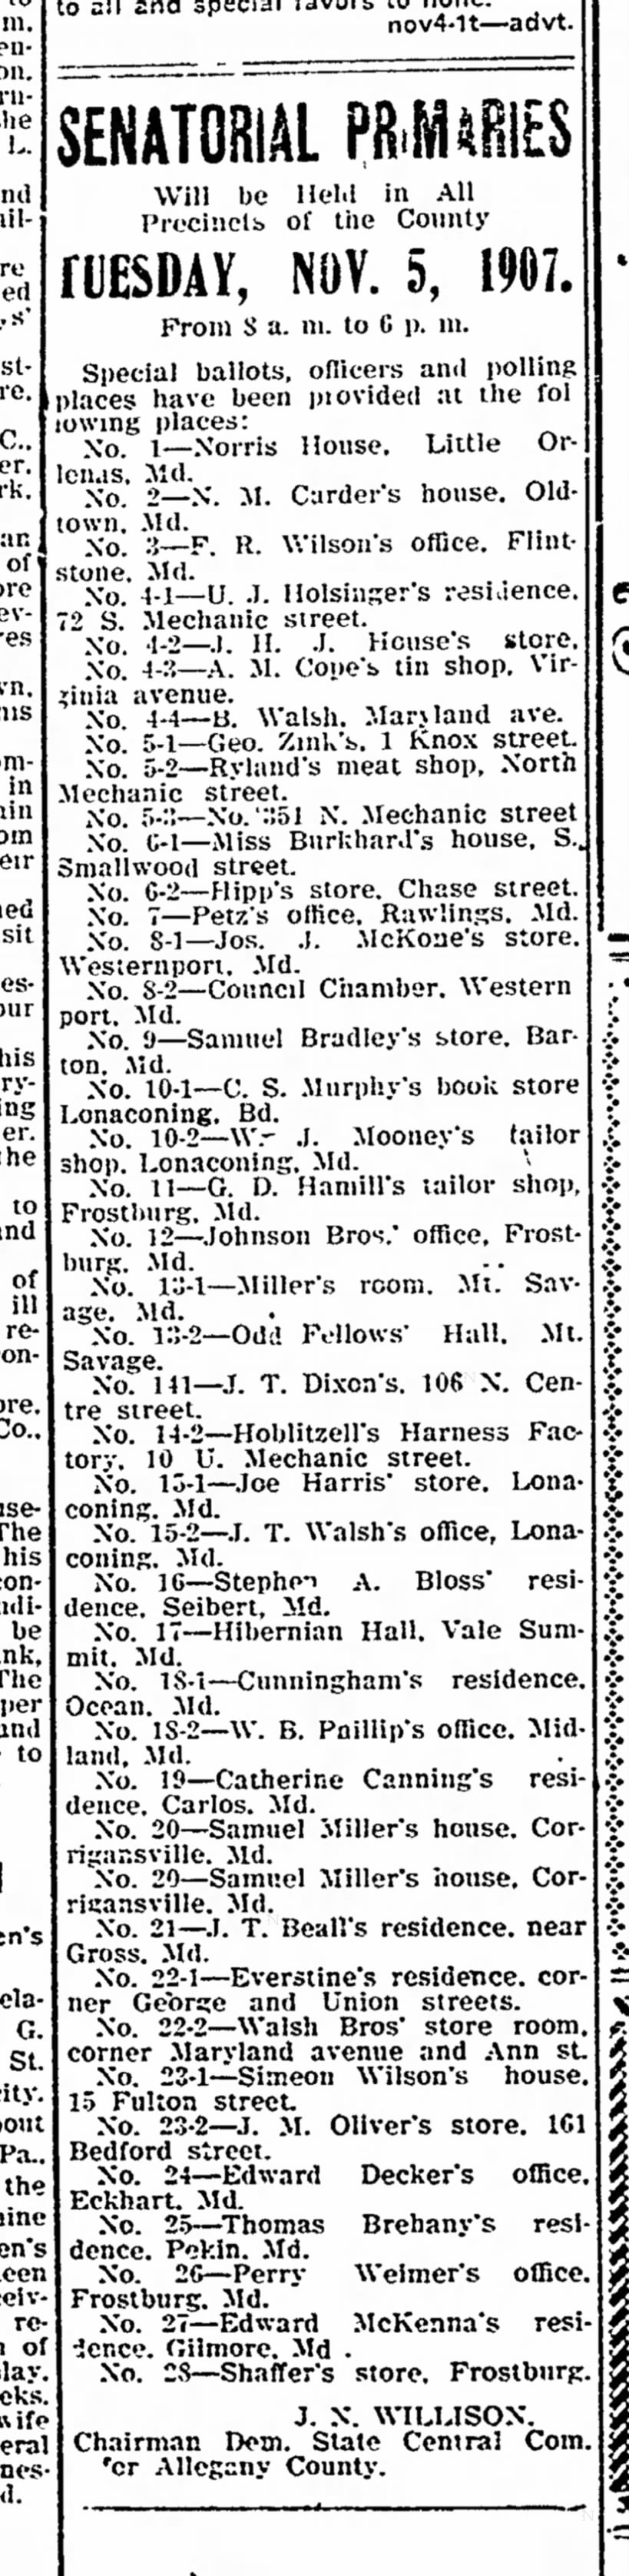 EJD's ofc used as a polling place. 11/4/1907